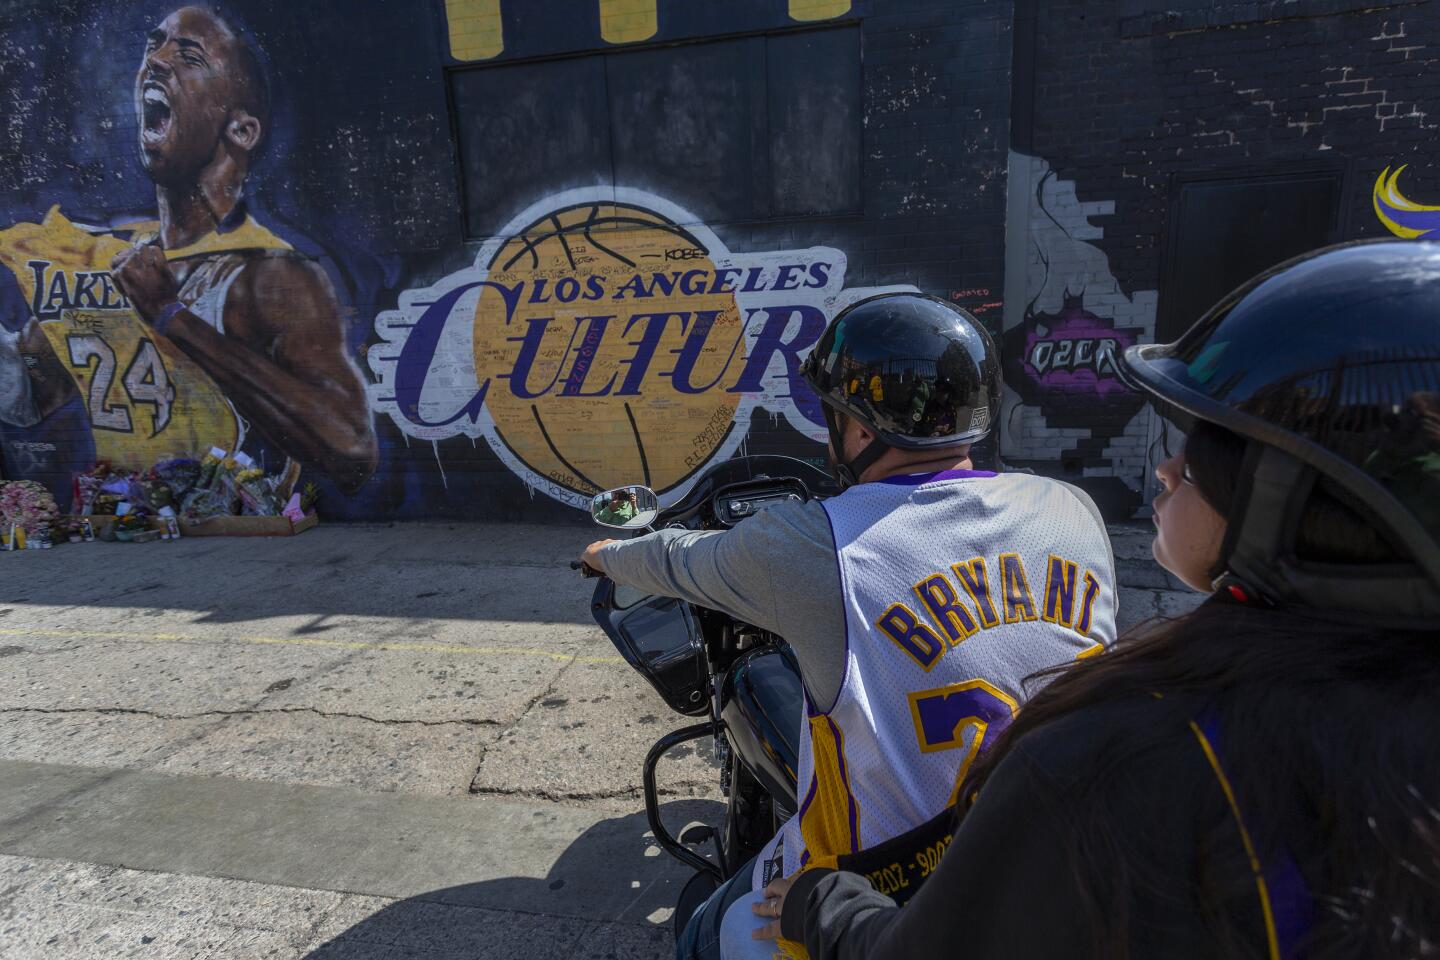 LOS ANGELES, CA - FEBRUARY 24: Fans on a motorcycle visit a mural for former Los Angeles Lakers basketball star Kobe Bryant during the official memorial ceremony for him and his daughter, Gianna, at nearby Staple Center on February 24, 2020 in Los Angeles, California. Kobe and his 13-year-old daughter who were among nine people killed in a helicopter crash on January 26 as they were flying to his Mamba Sports Academy where he was to coach her in a tournament game. (Photo by David McNew/Getty Images) ** OUTS - ELSENT, FPG, CM - OUTS * NM, PH, VA if sourced by CT, LA or MoD **